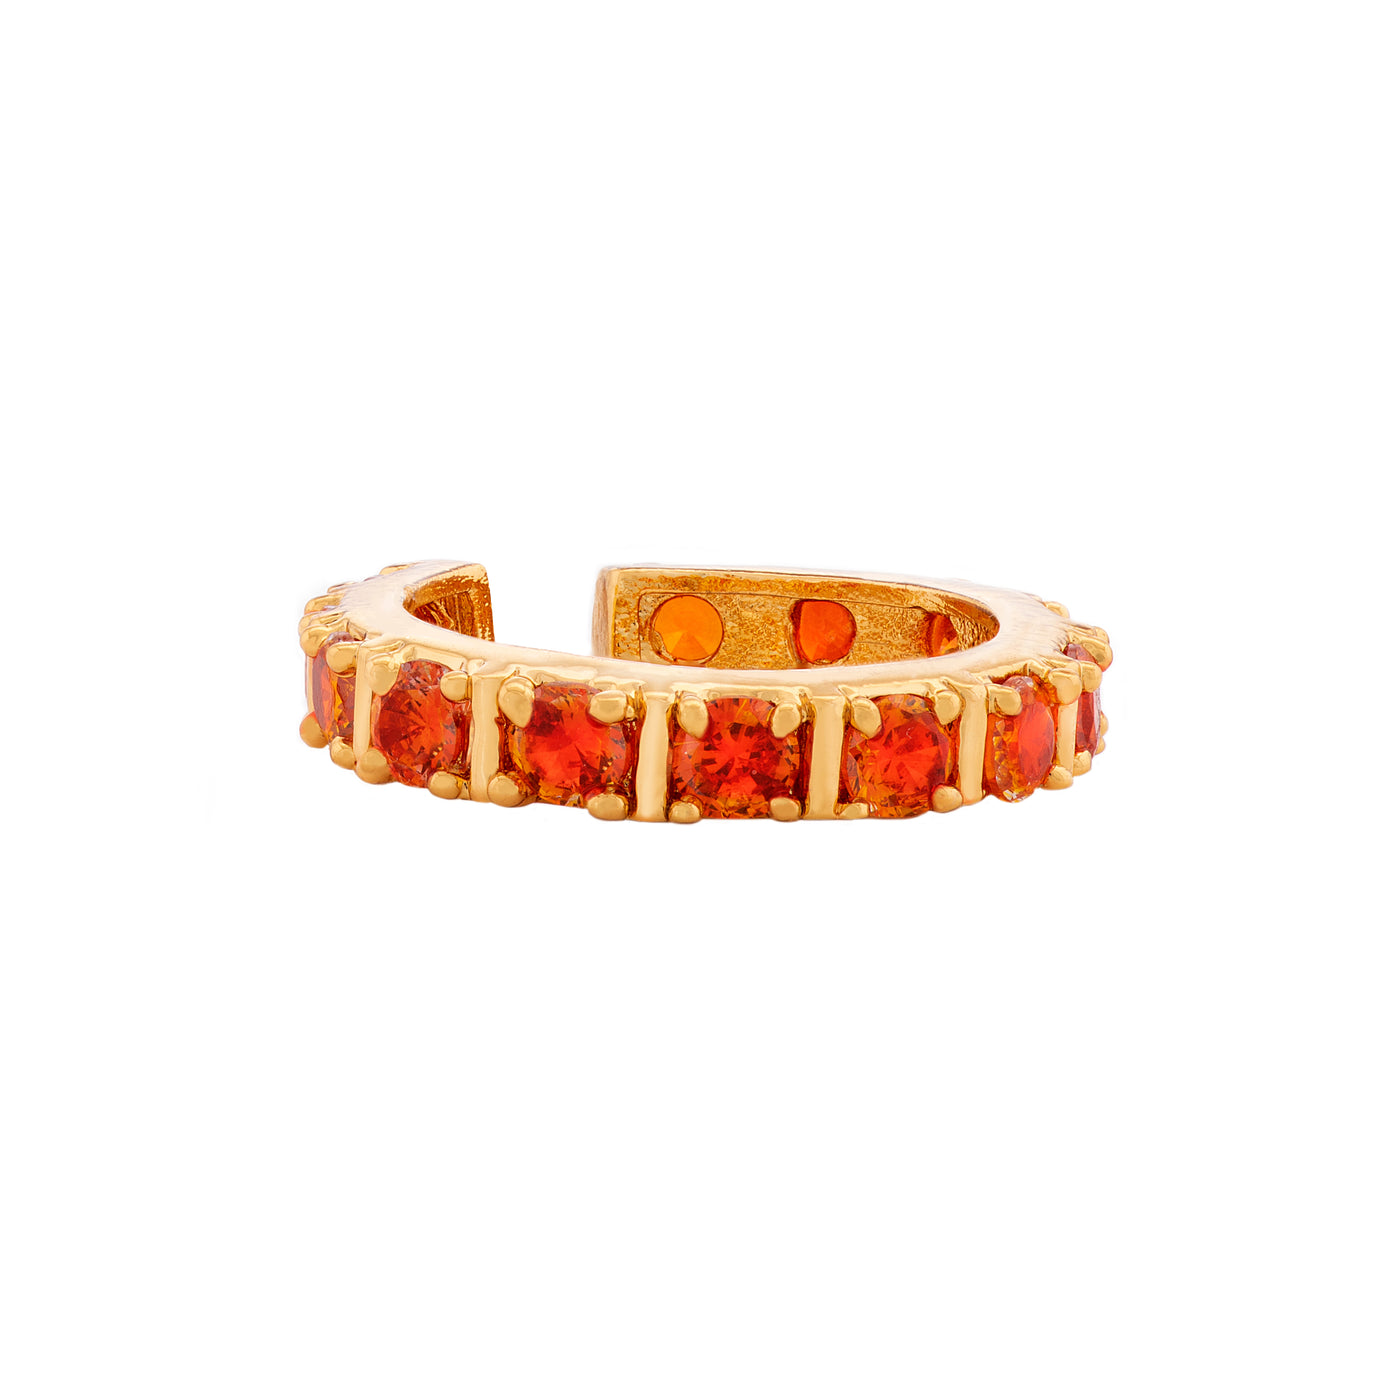 Fancy gold plated band ring with multiple square orange american diamonds (adjustable)